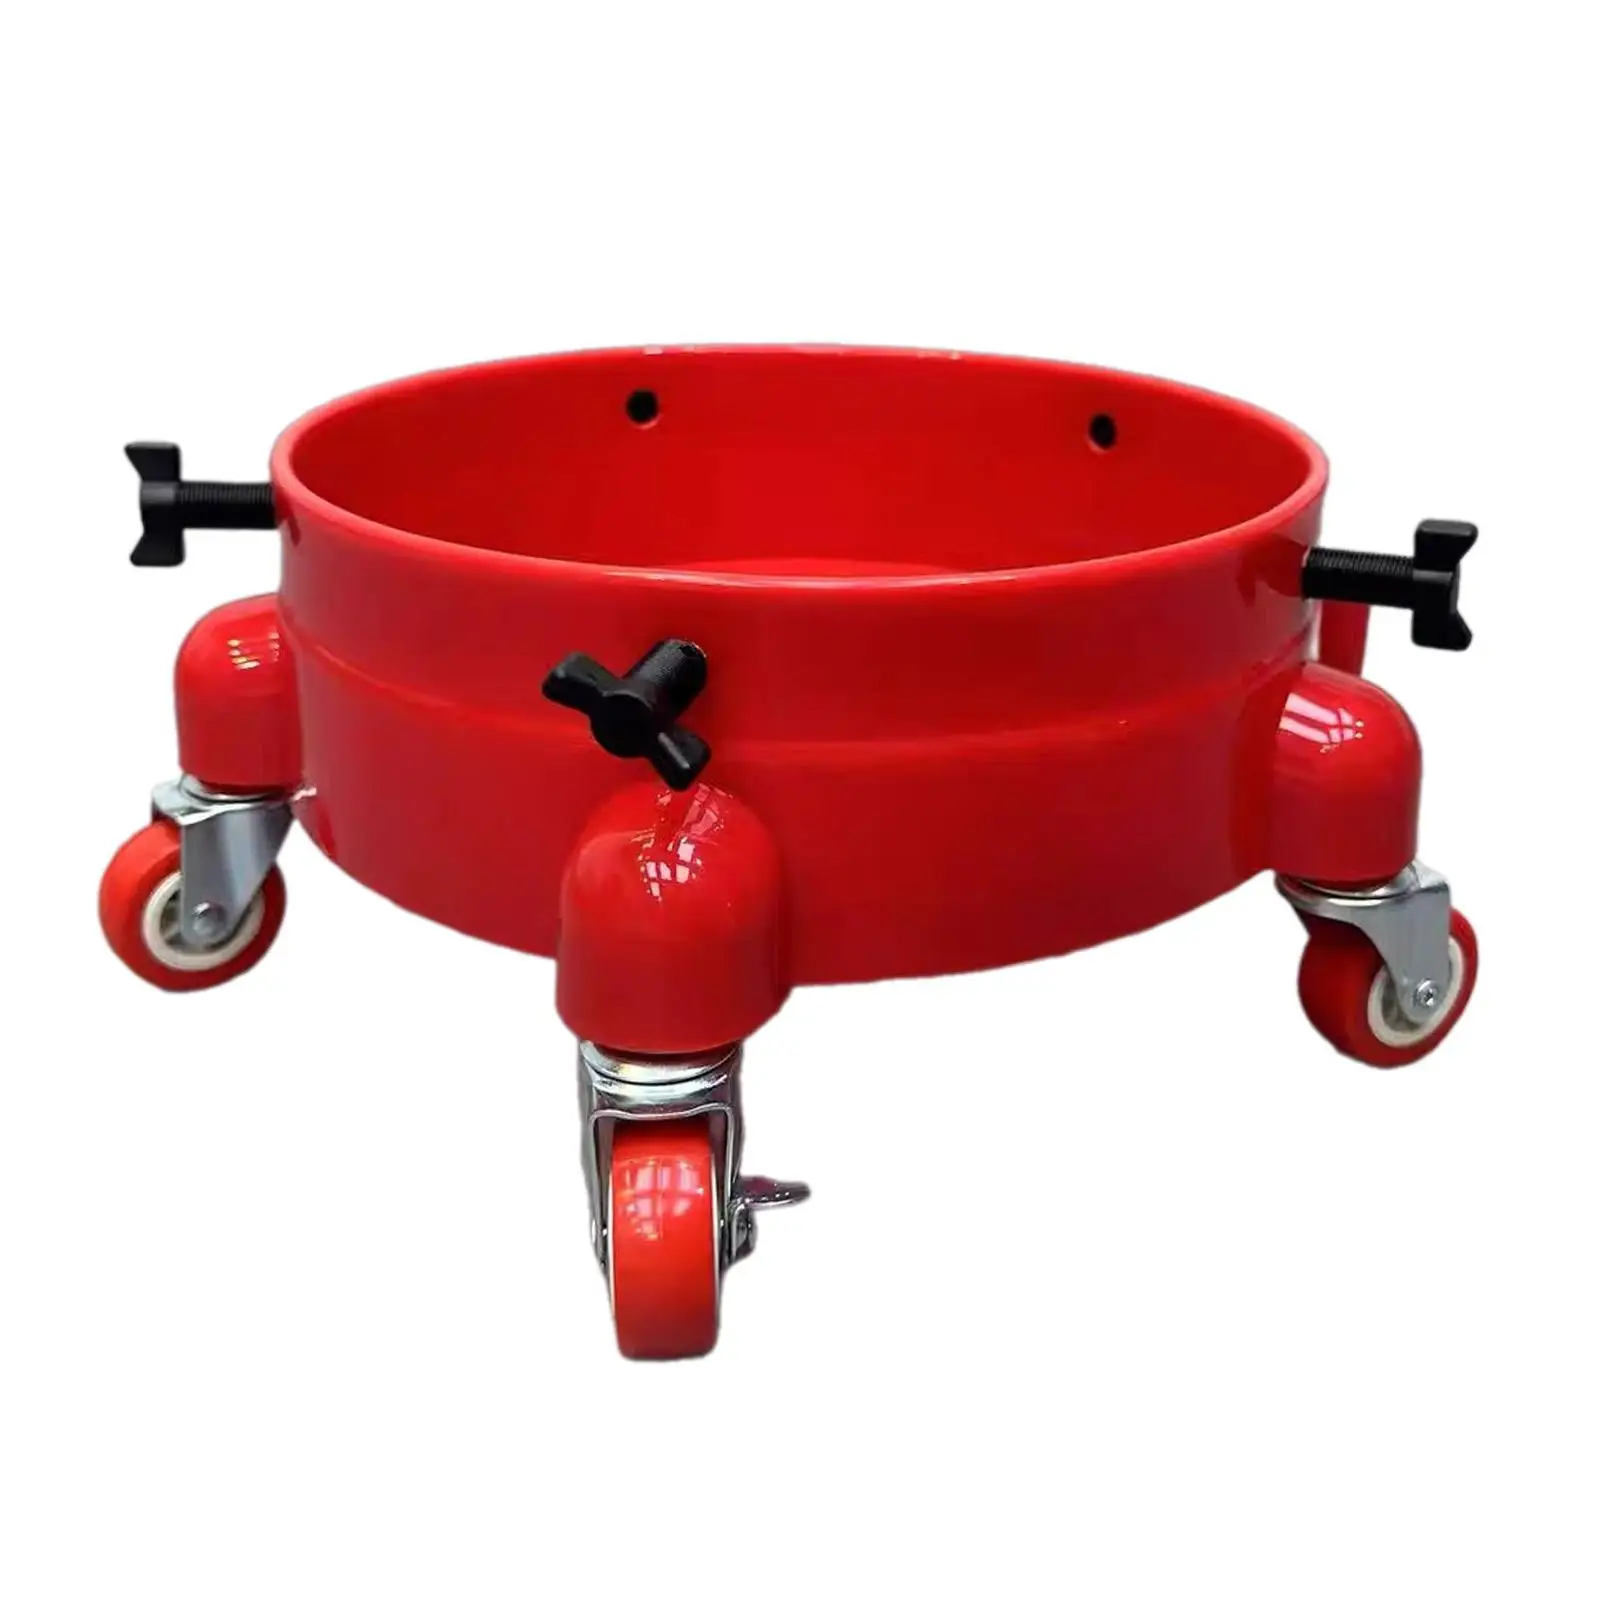 Car Wash Bucket Dolly Convenient Rolling Bucket Dolly Round for Car Washing Building Workers Painting Assistance Cleaners